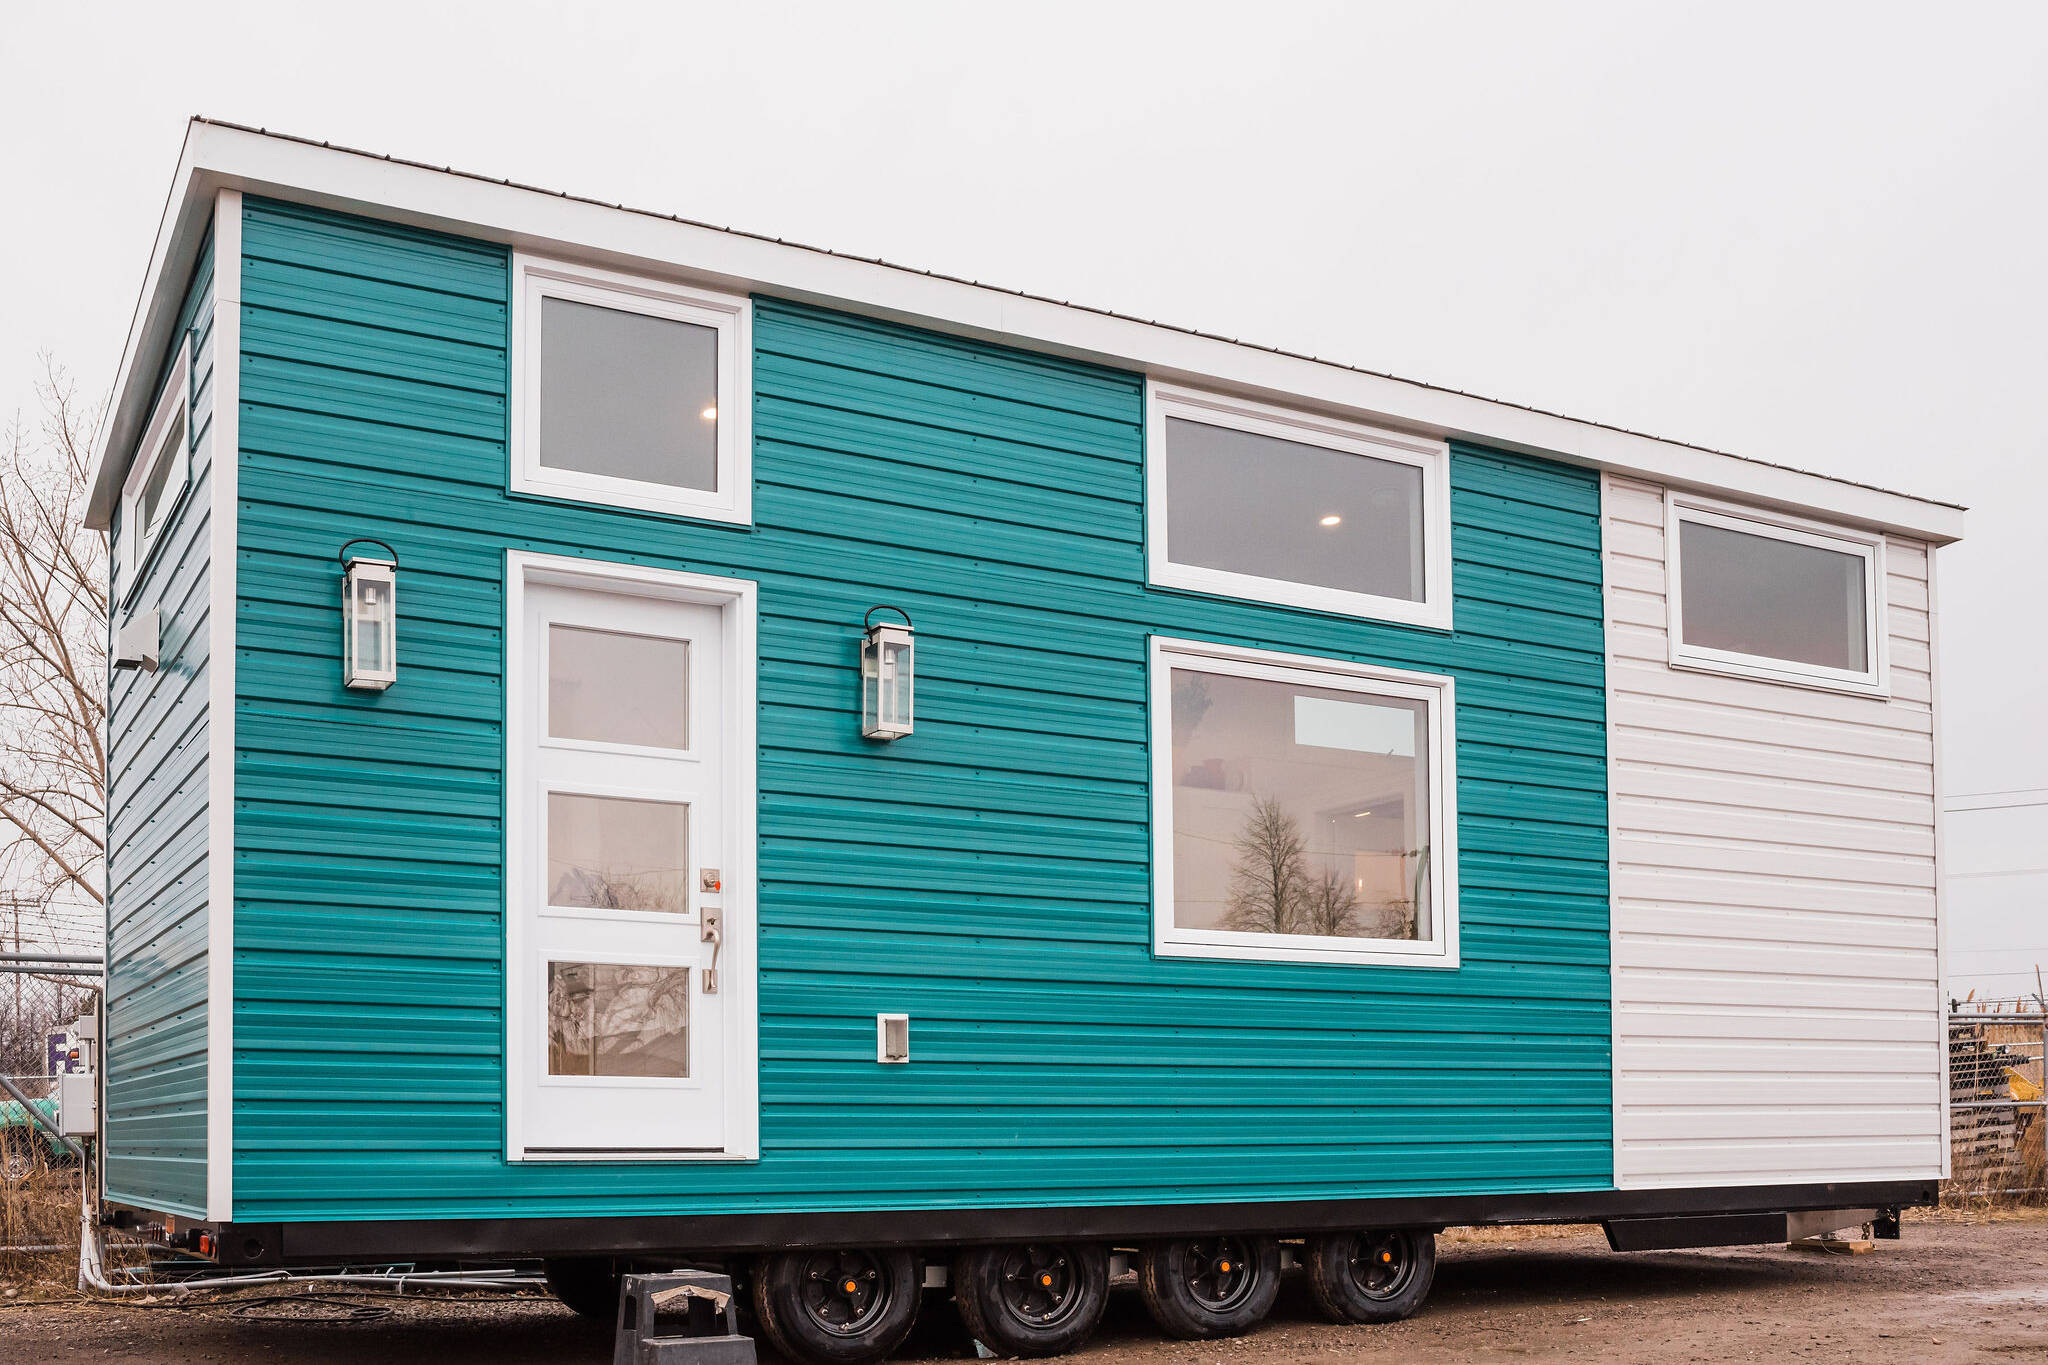 You can buy an adorable tiny home in Hamilton for $125K